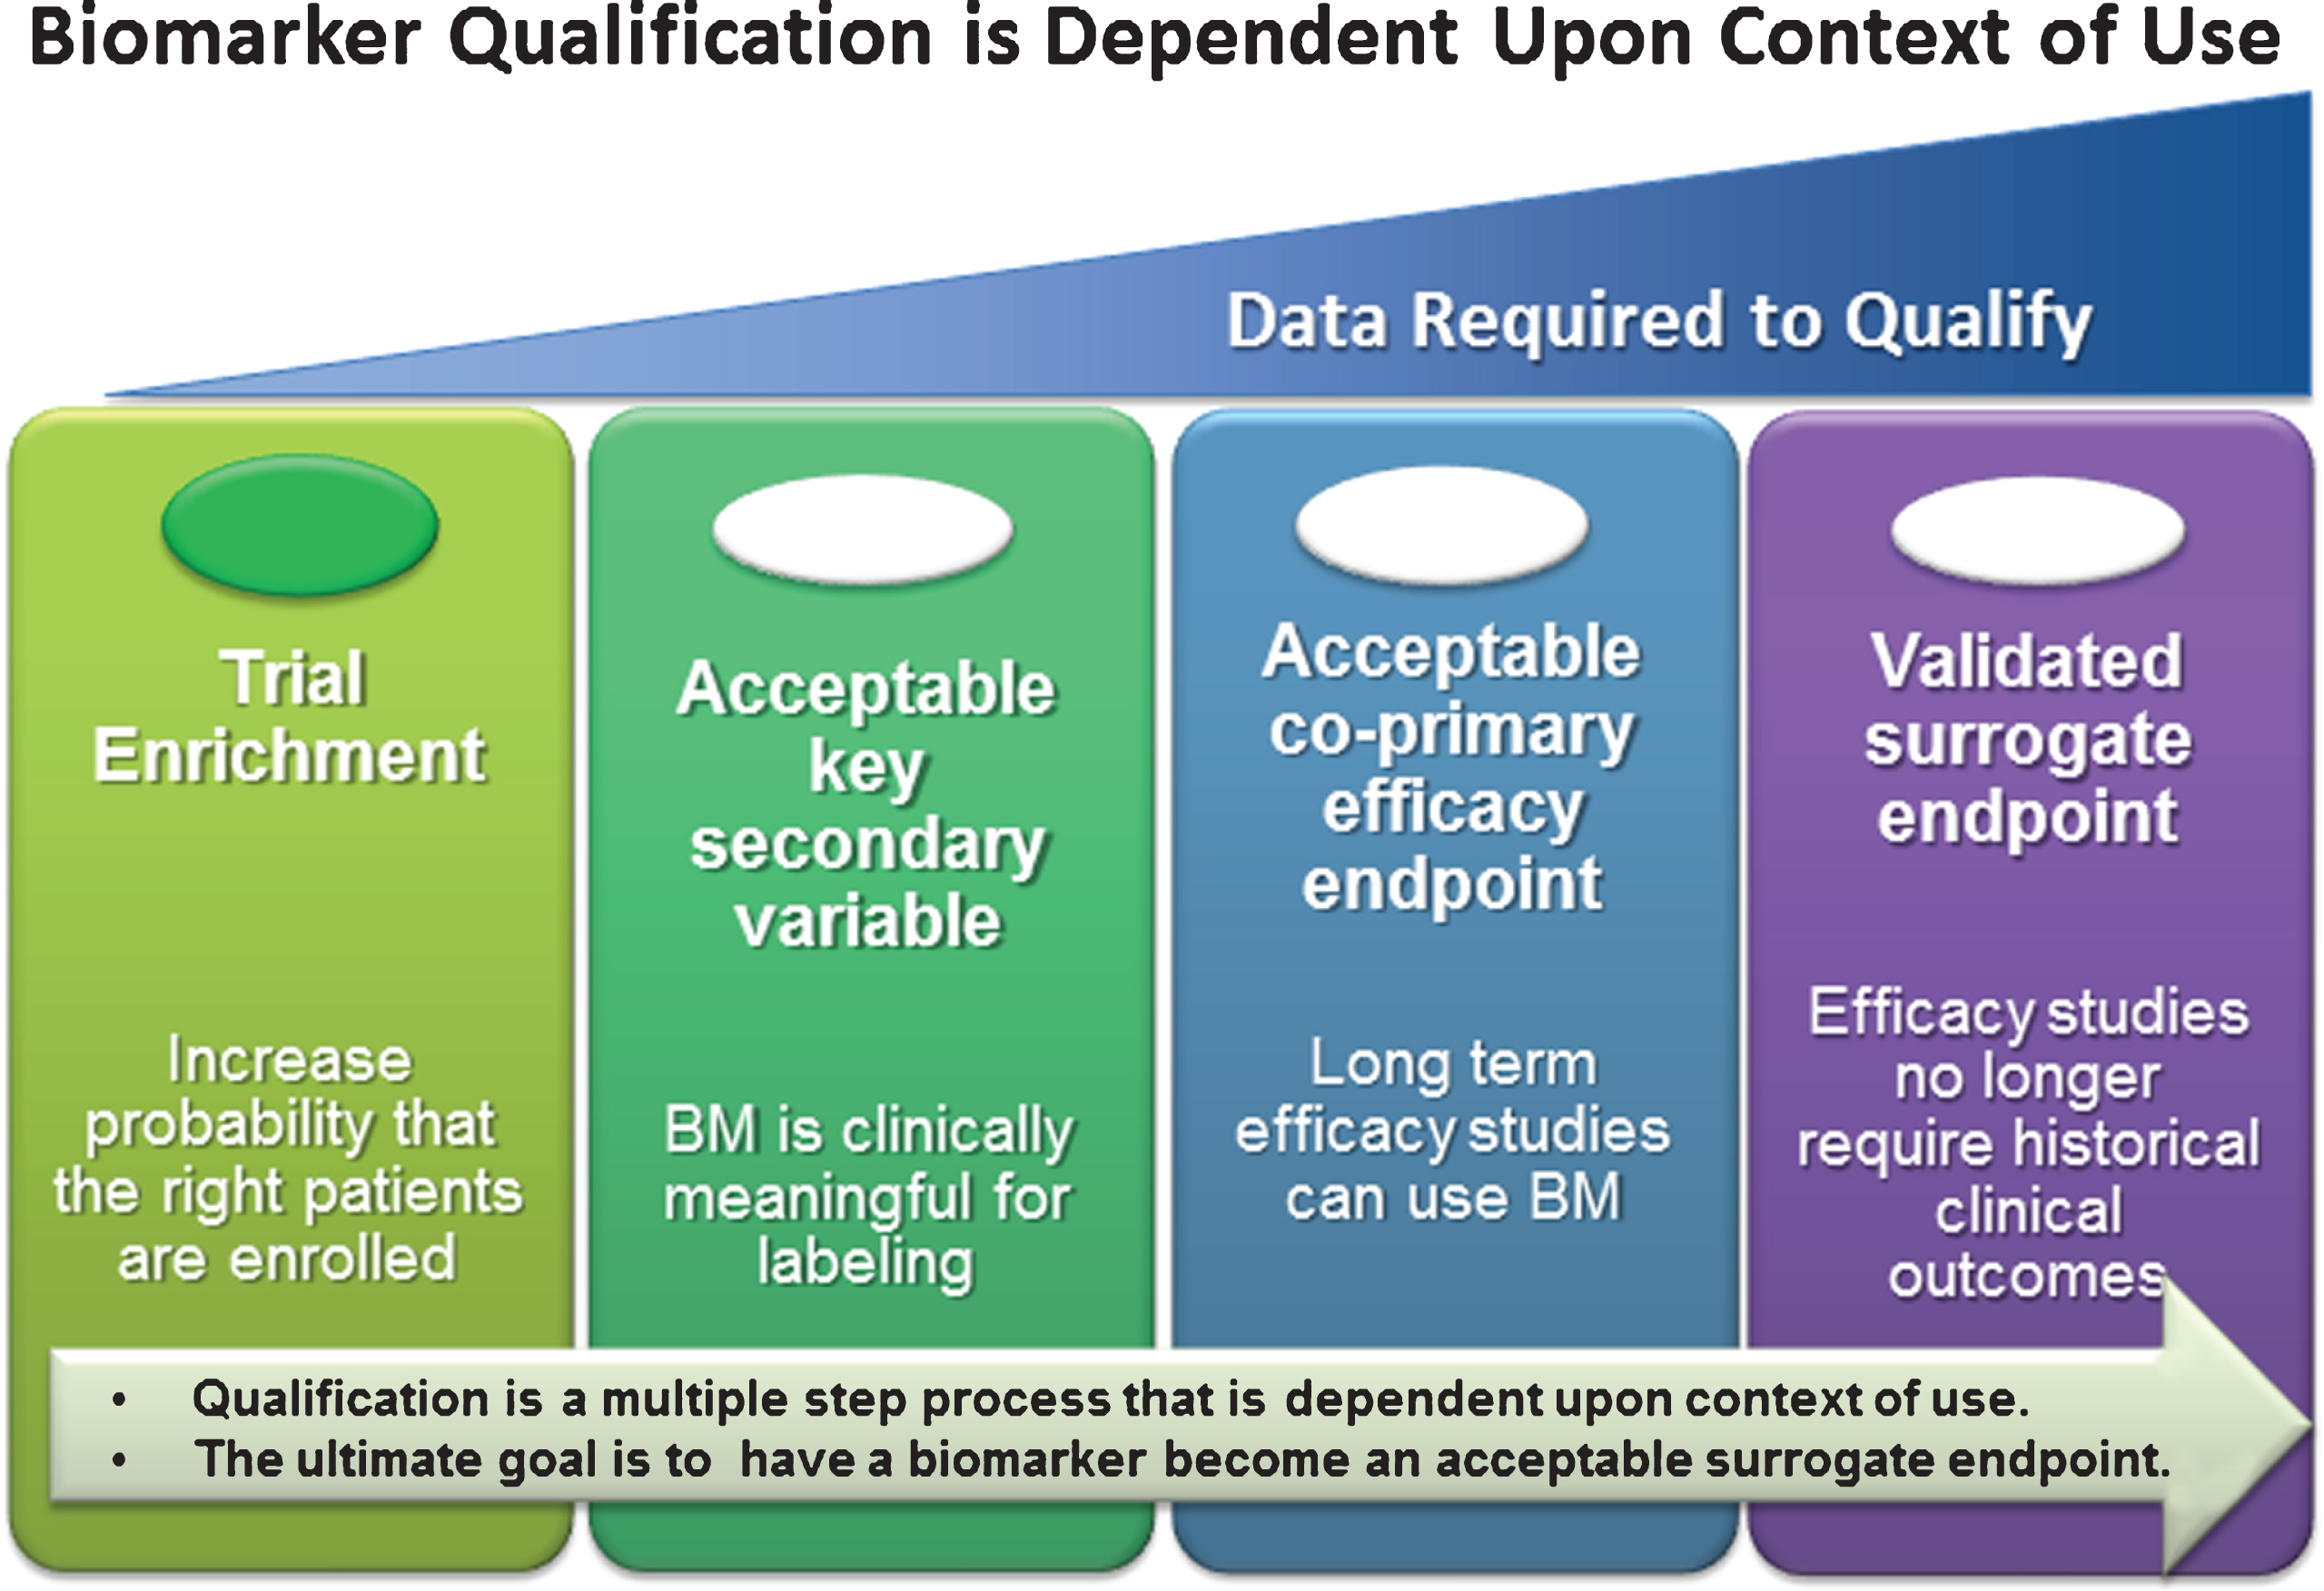 Qualification of clinical biomarkers, regardless of target patient population, is focused on acquiring sufficient patient level anonymized data to support a given “context-of- use” (COU) for clinical trial decision making. The greater the impact this clinical decision (i.e., COU) has on the patient, the greater the evidence that will be required to support a qualification recommendation by a regulatory agency. The focus of CAMD’s work is to provide sufficient evidence for the use of CSF biomarkers for trial enrichment in the pre-dementia stage of AD. Note: At the time of this publication, no clinical biomarker has been qualified as a validated surrogate endpoint for any neurological indication.